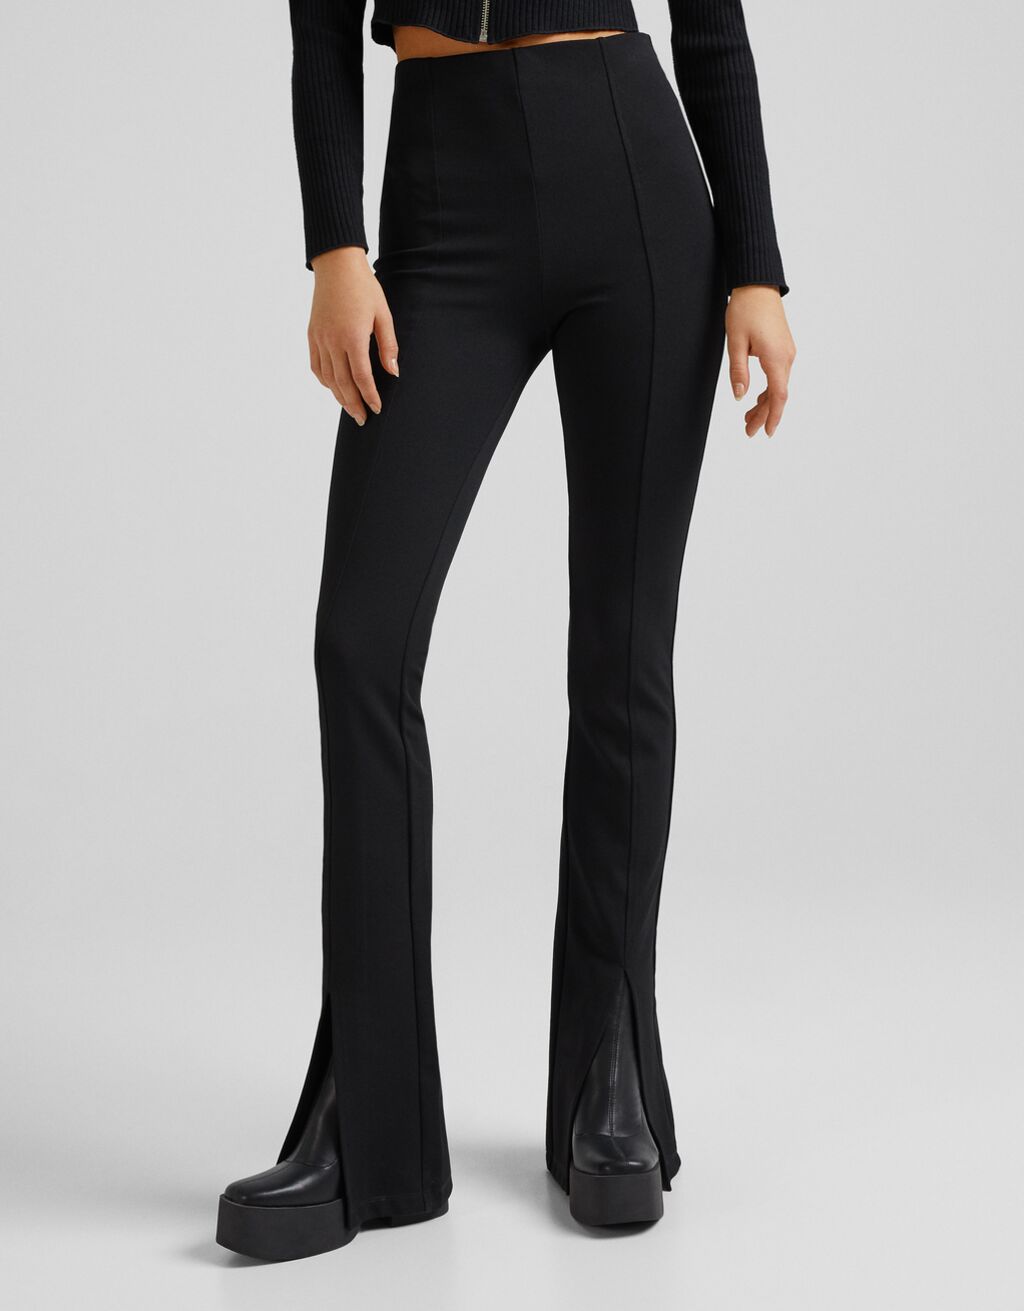 Flare trousers with split hems